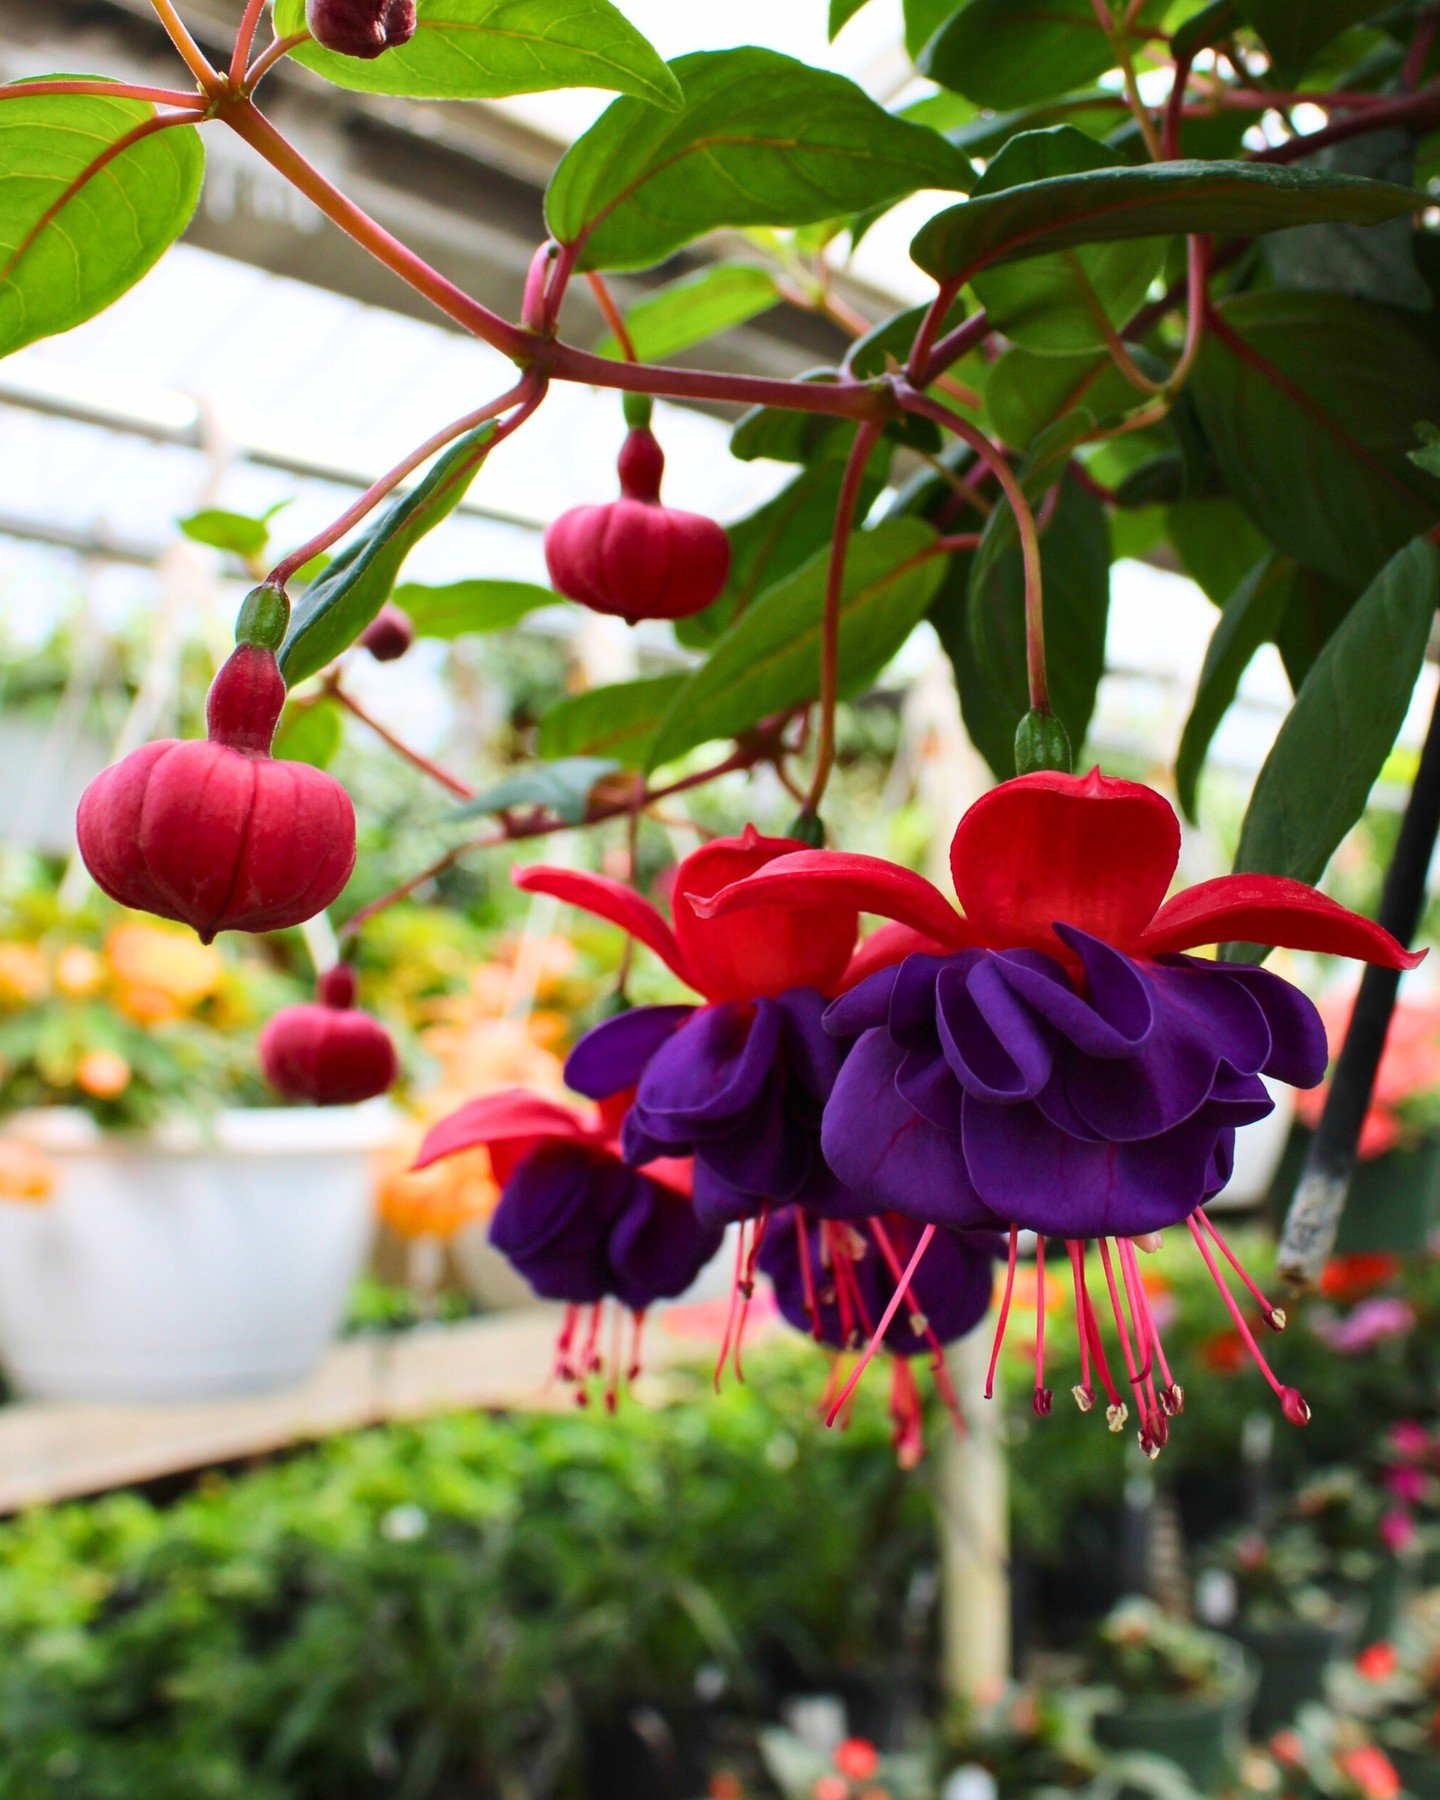 Fuchsia are unique annuals admired not only for their beauty, but for their attractiveness to hummingbirds and butterflies! 🌸🦋 Ideal for hanging baskets, we've got plenty spilling over with new blooms in a variety of color! Hurry, these go FAST!

#